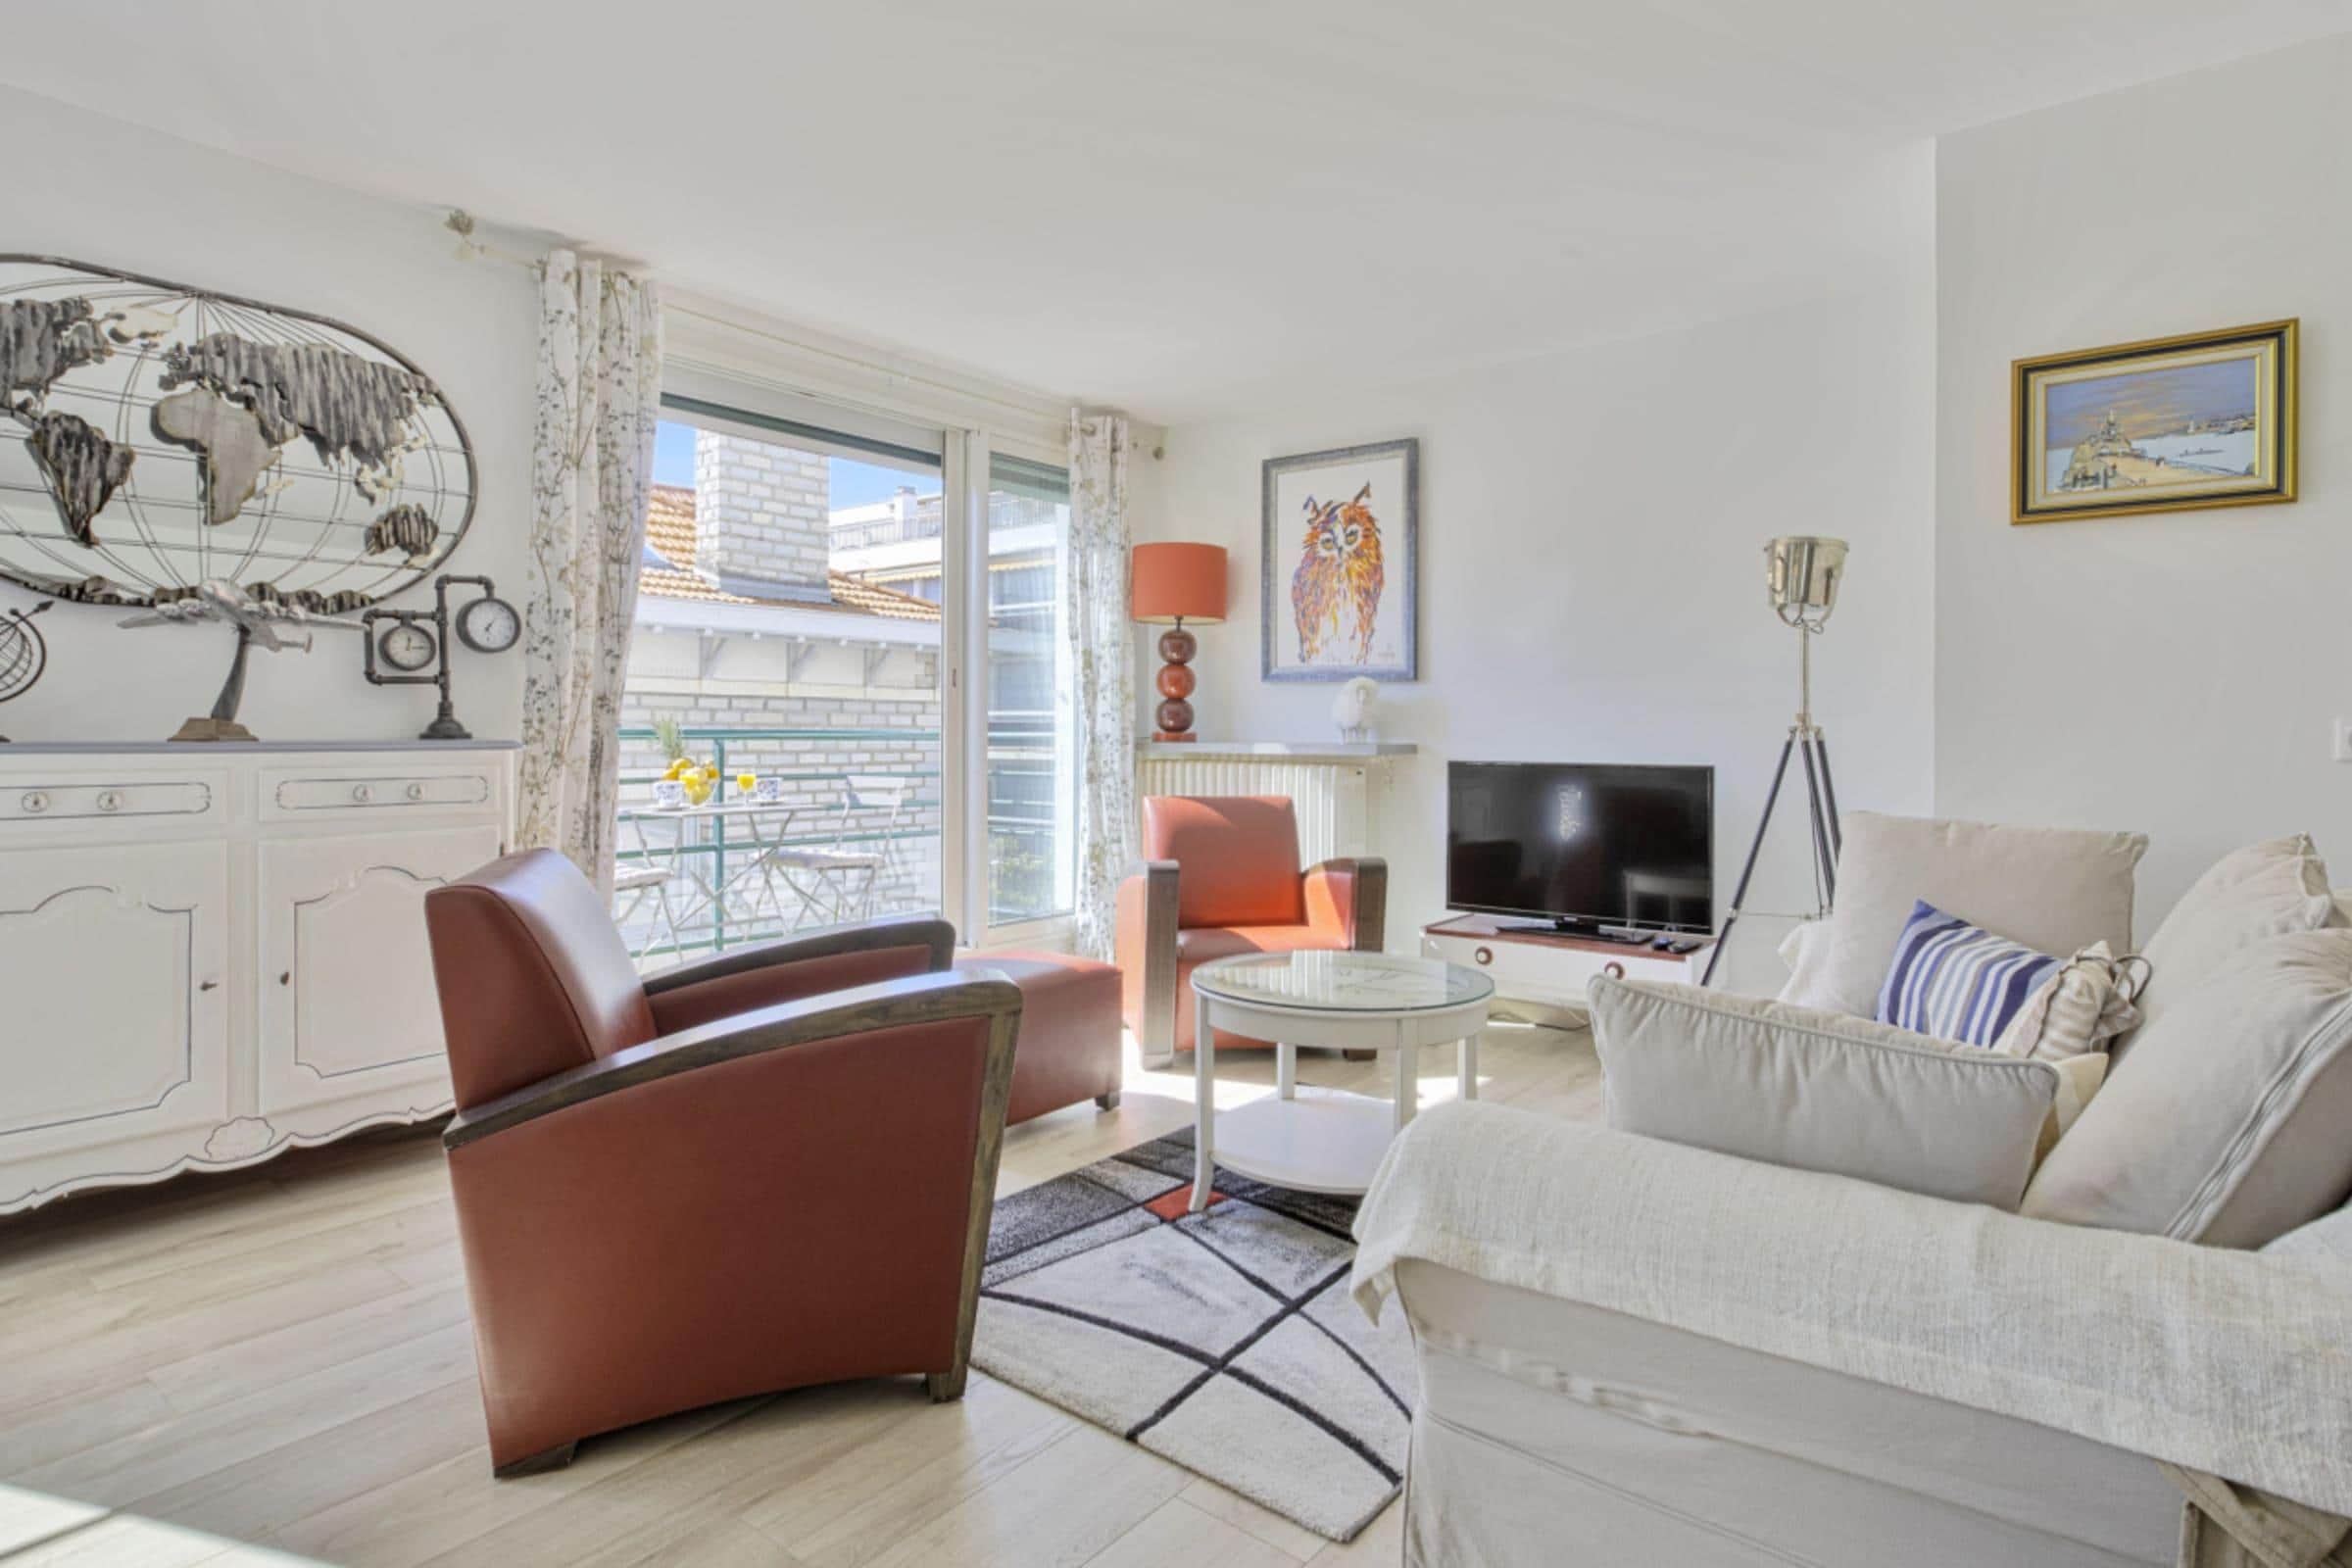 Property Image 1 - Stylish 2 bedroom flat in the heart of Biarritz